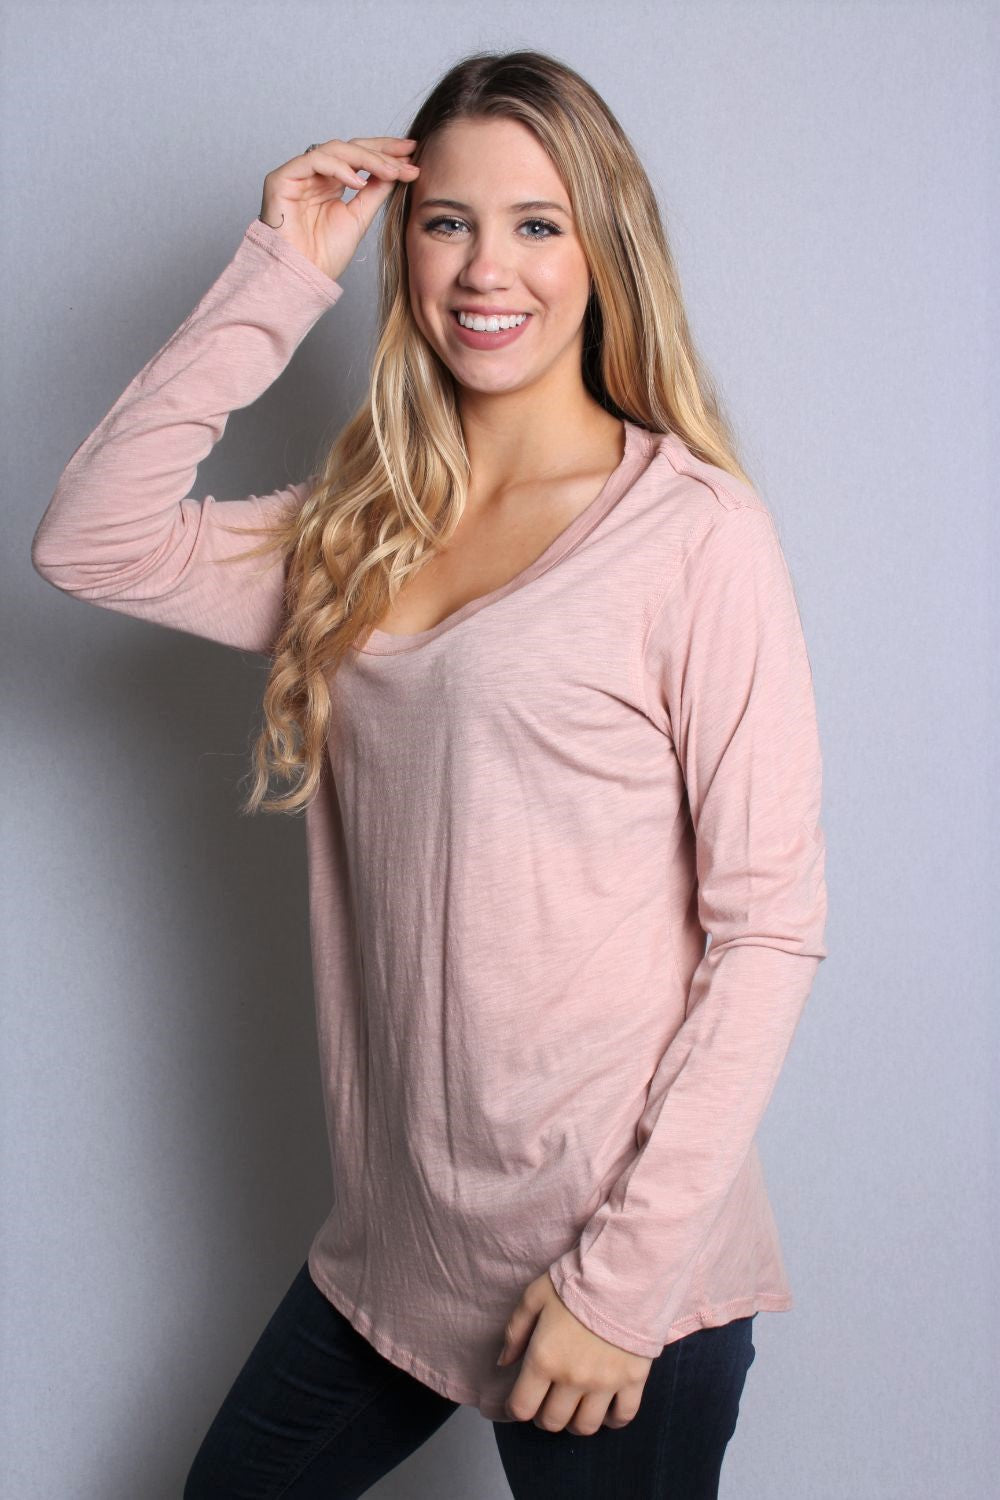 Women's Long Sleeve Round Neck Solid Top